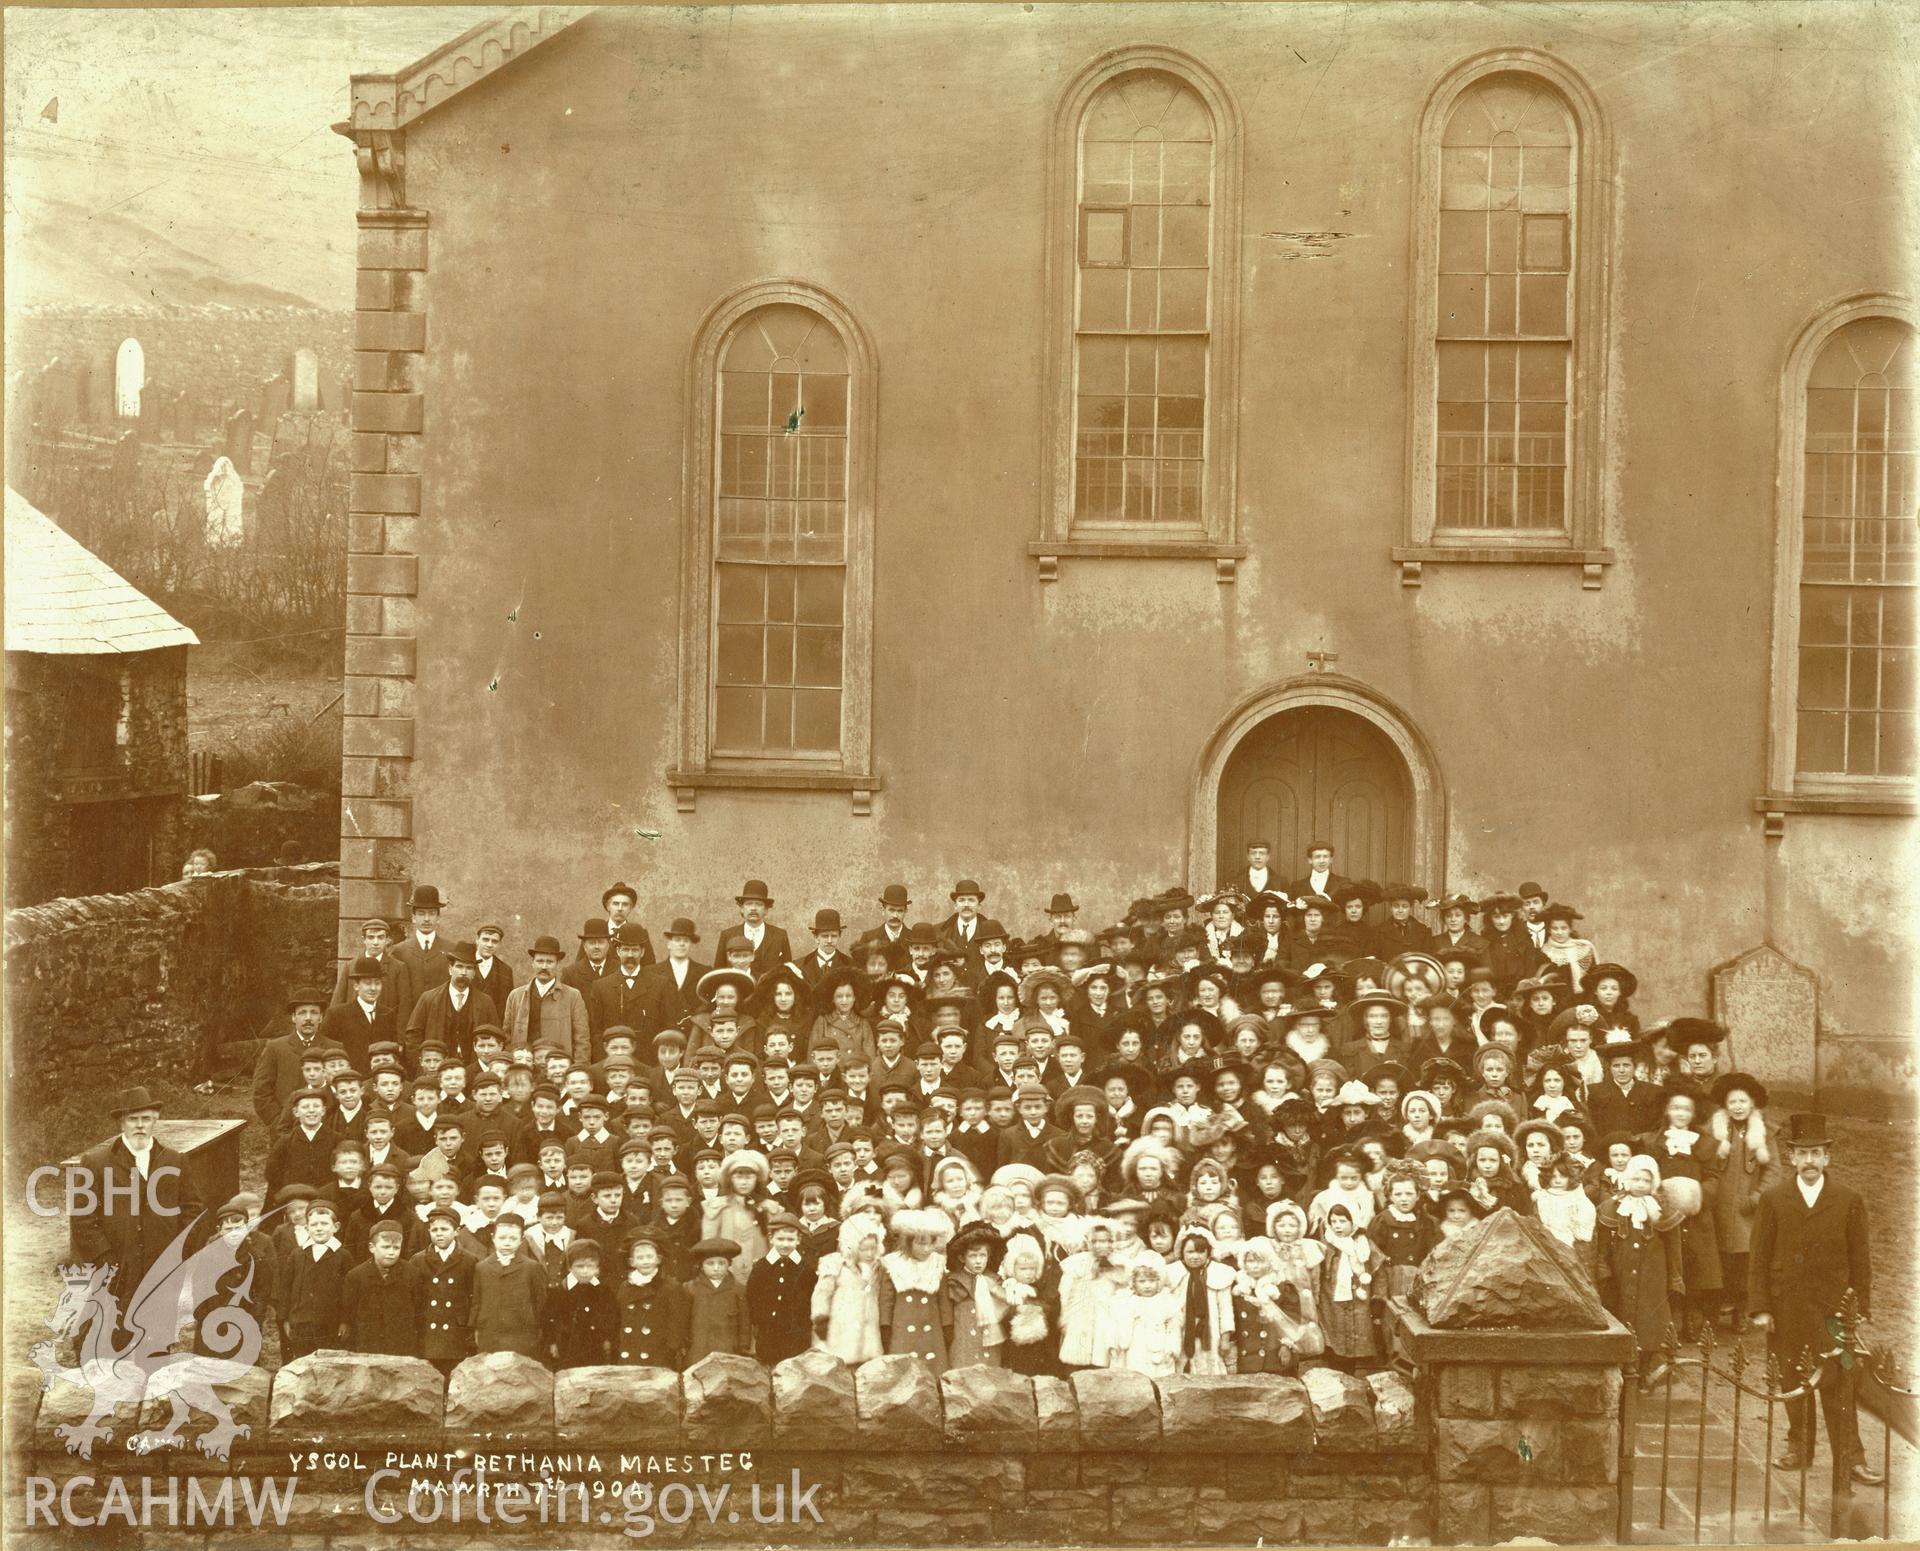 Digitized copy of a black and white photograph showing an exterior view of Bethania Chapel, Maesteg, with the congregation and school pupils. Part of a collection of material relating to Bethania Chapel, Maesteg, loaned for copying by the Welsh Religious Buildings Trust. The original collection is held by the Glamorgan Record Office.